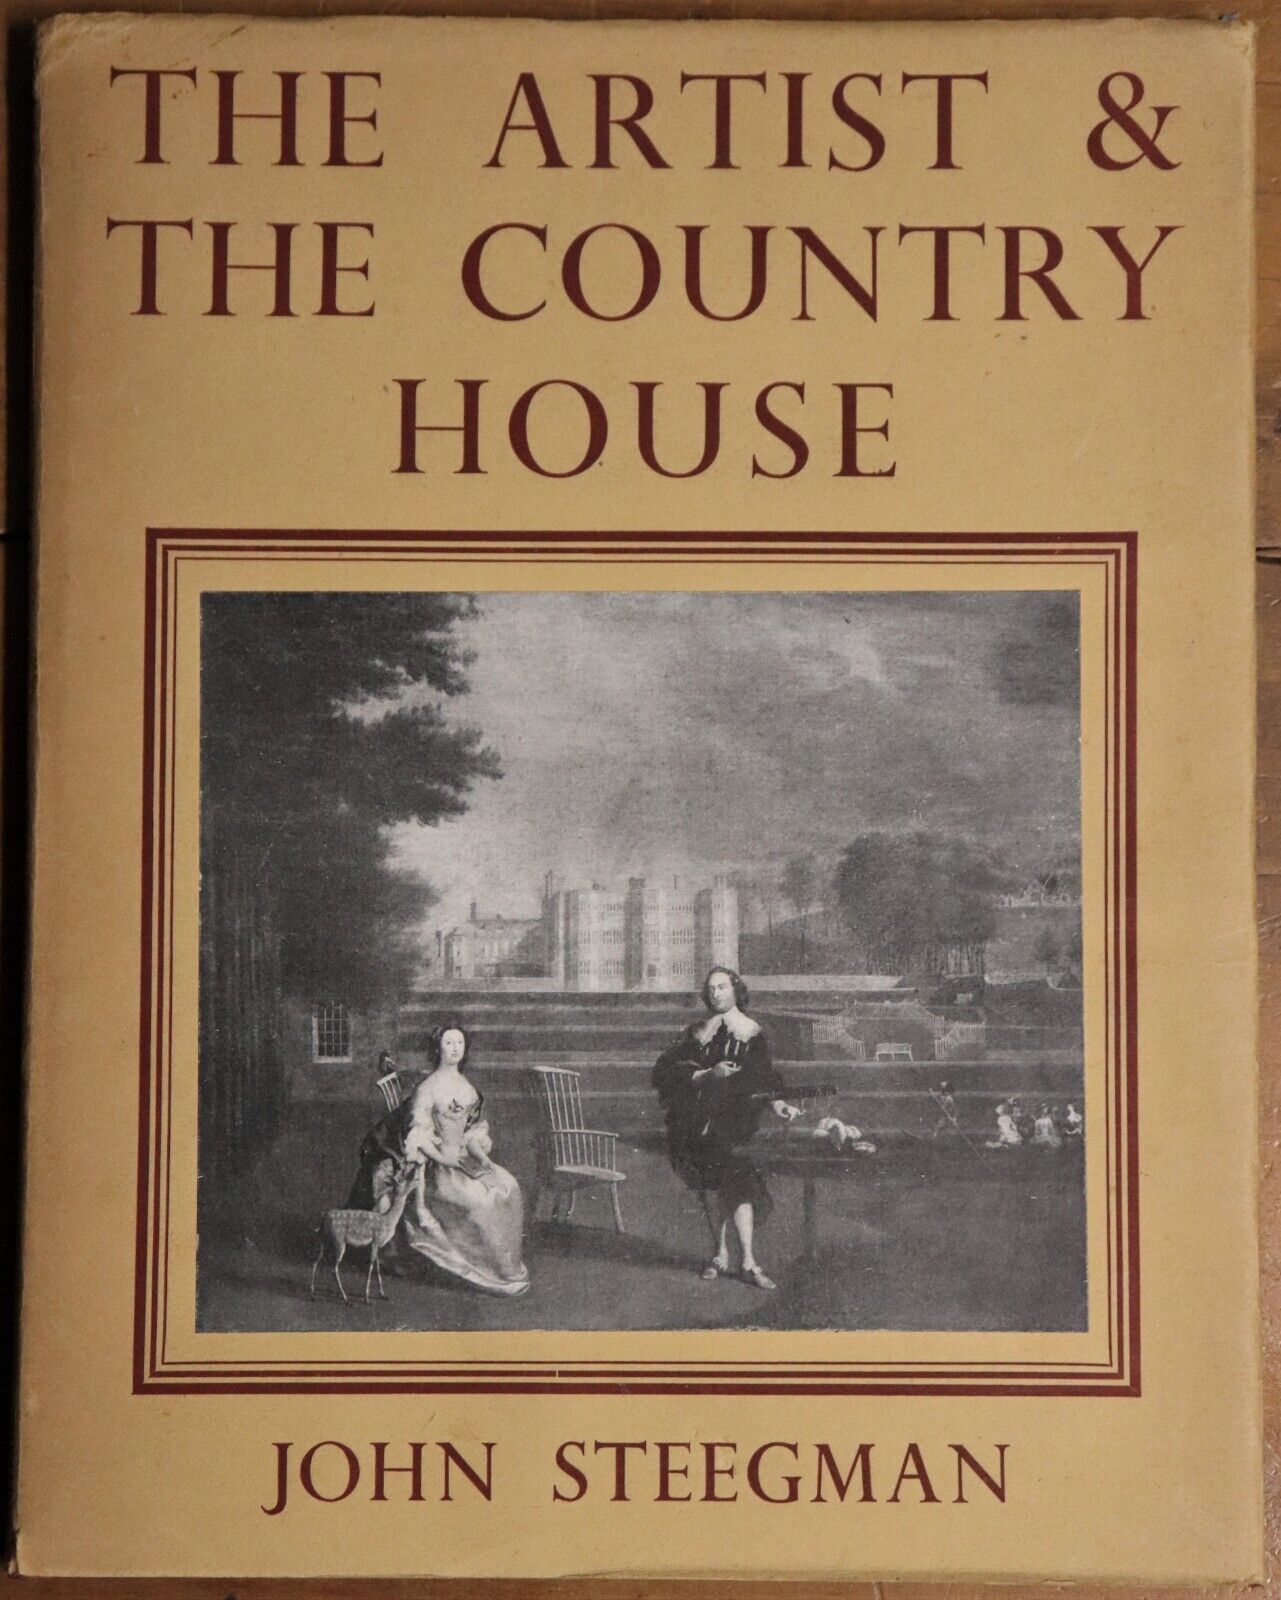 The Artist & The Country House - 1949 - 1st Edition - Vintage Art Book